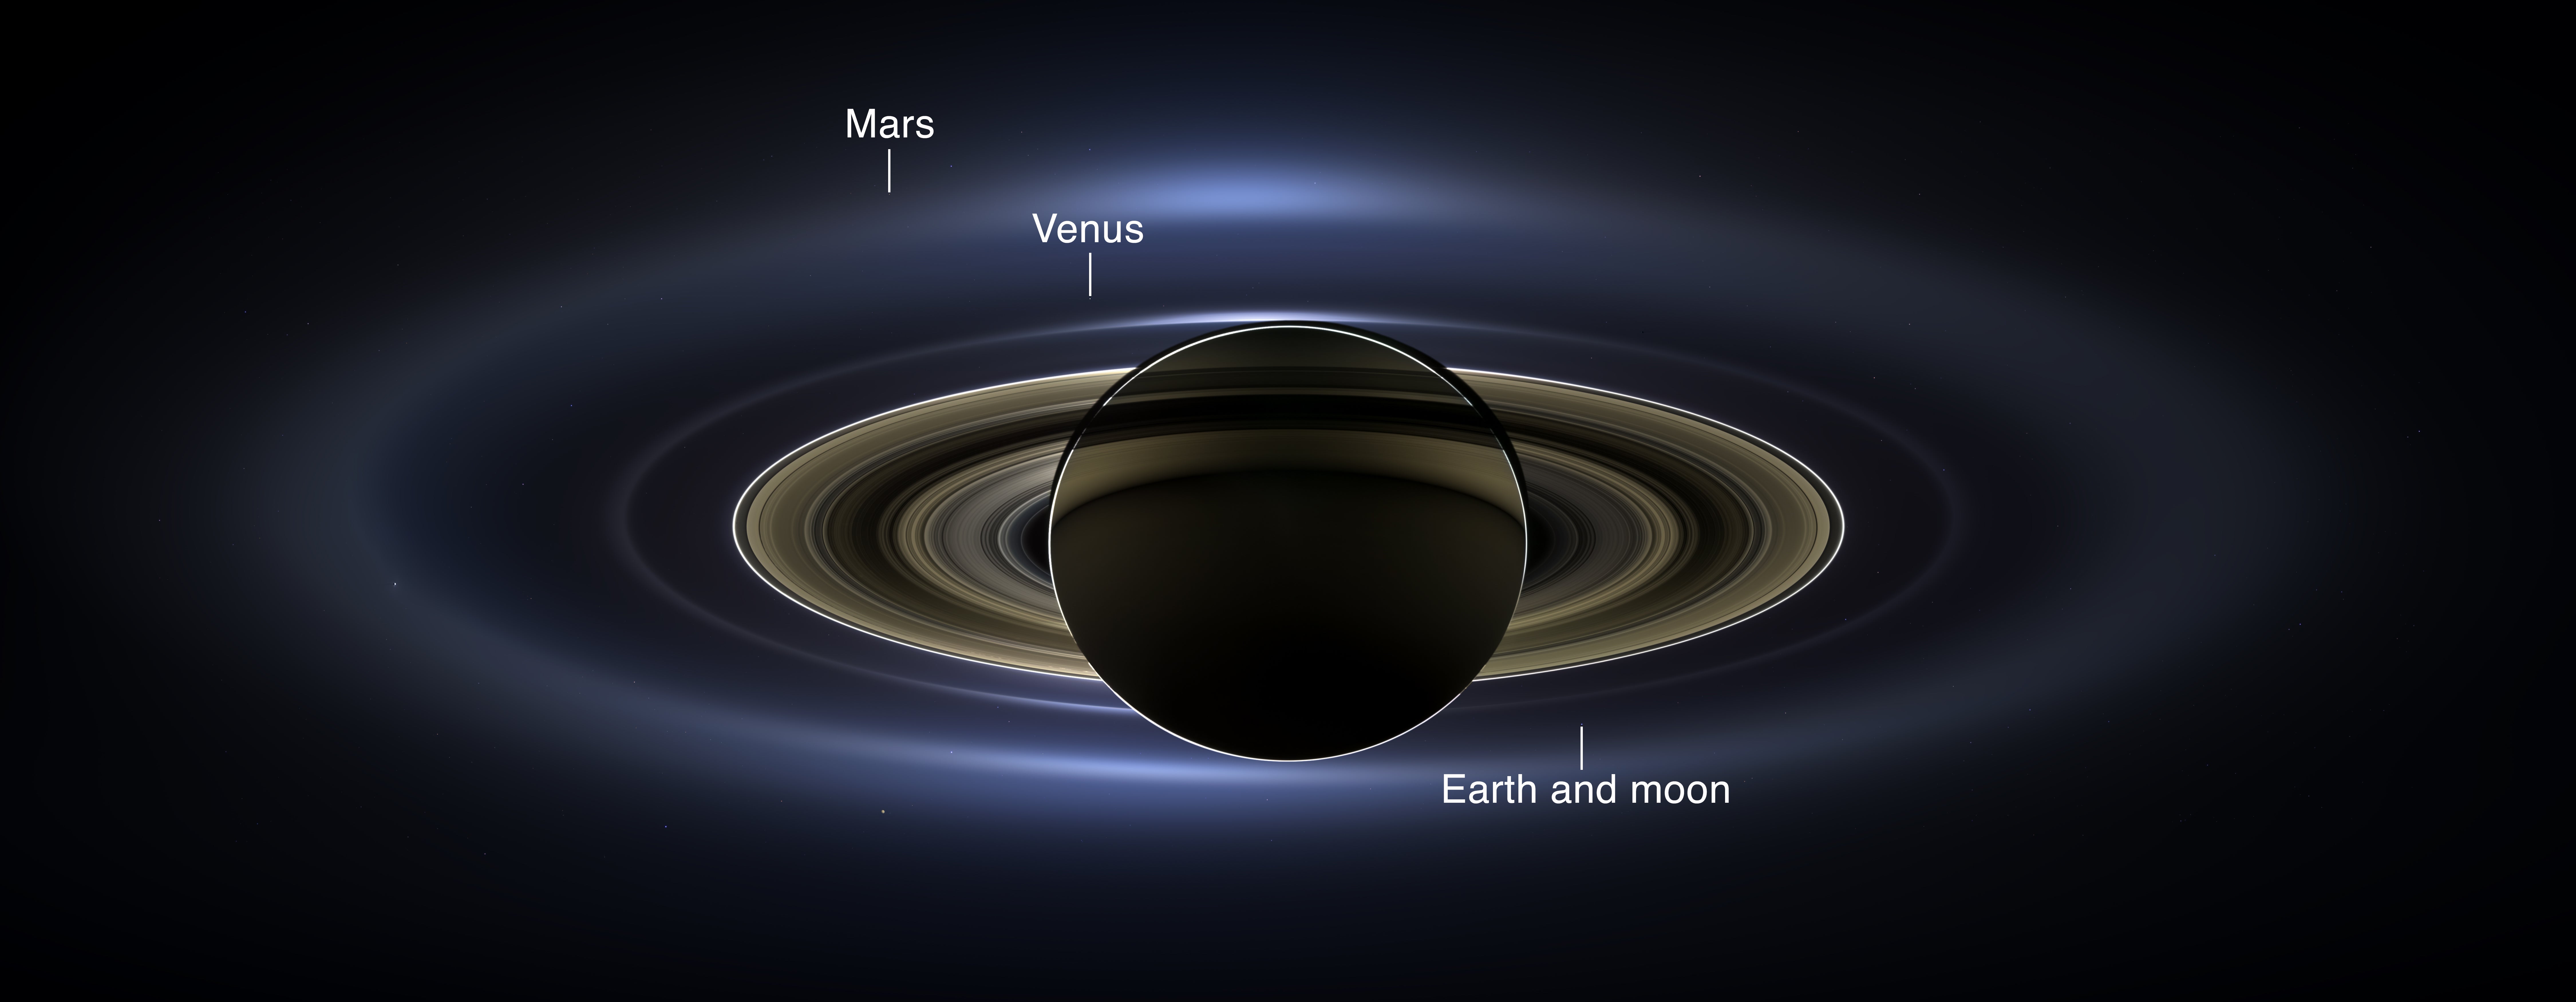 Annotated view of Mars, Venus, and Earth/Moon. (Image: NASA/JPL-Caltech/SSI)